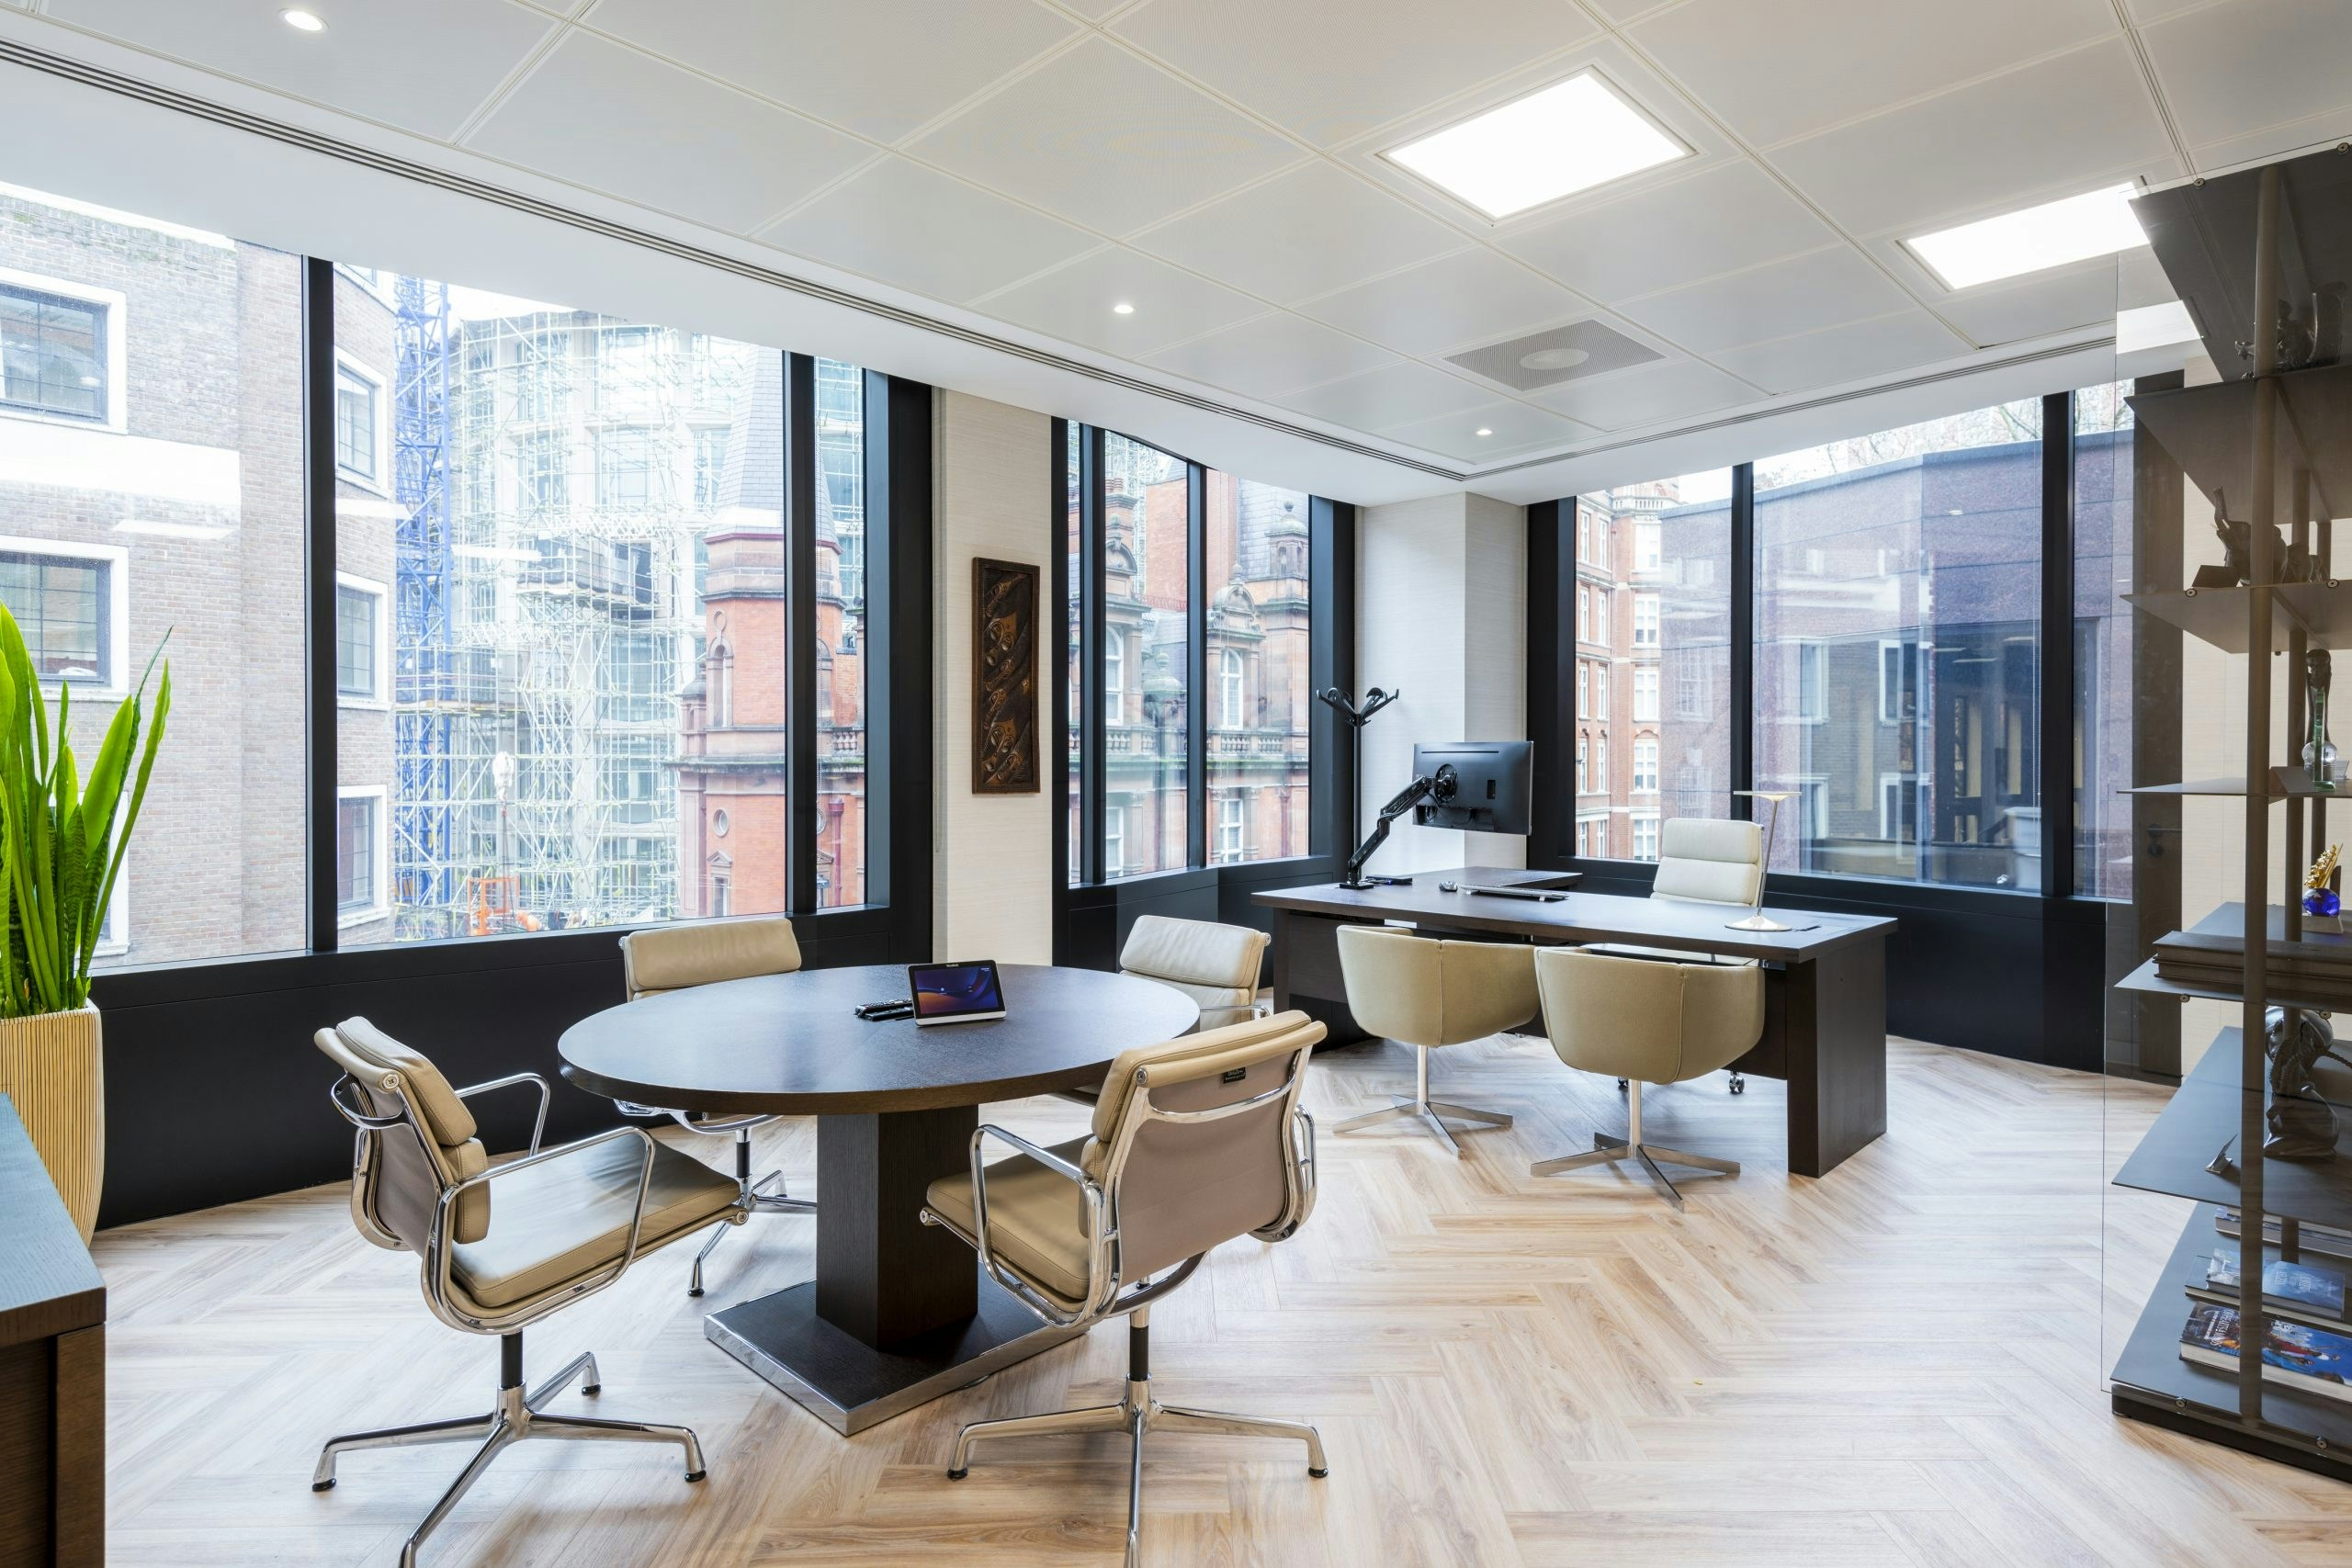 Angola LNG Office Design and Build London